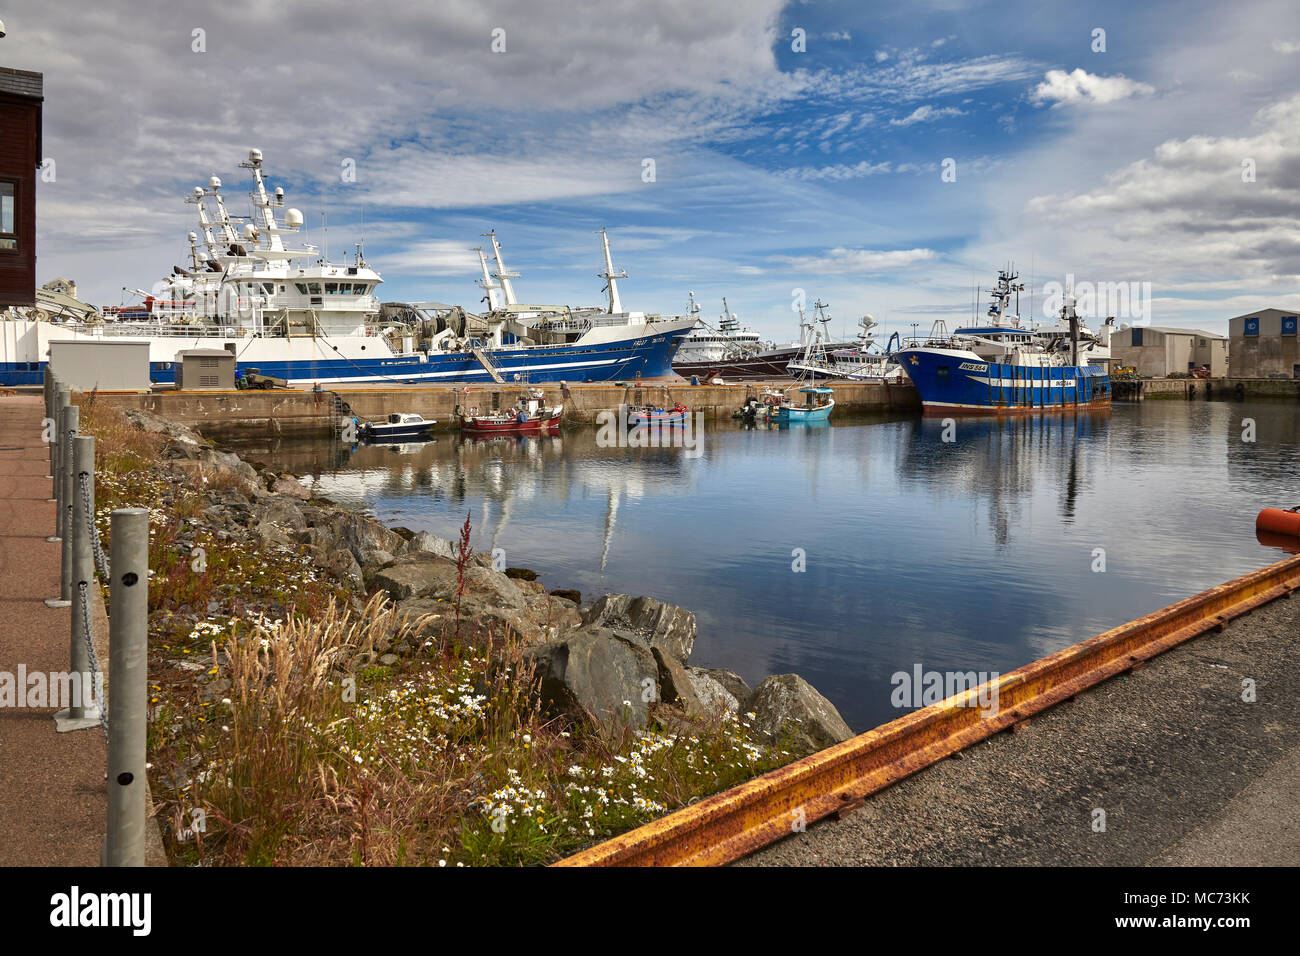 Inverness registered trawler Artemis INS564 moored with other small fishing craft, at Fraserburgh Harbour. Pelagic trawlers moored in background. Stock Photo